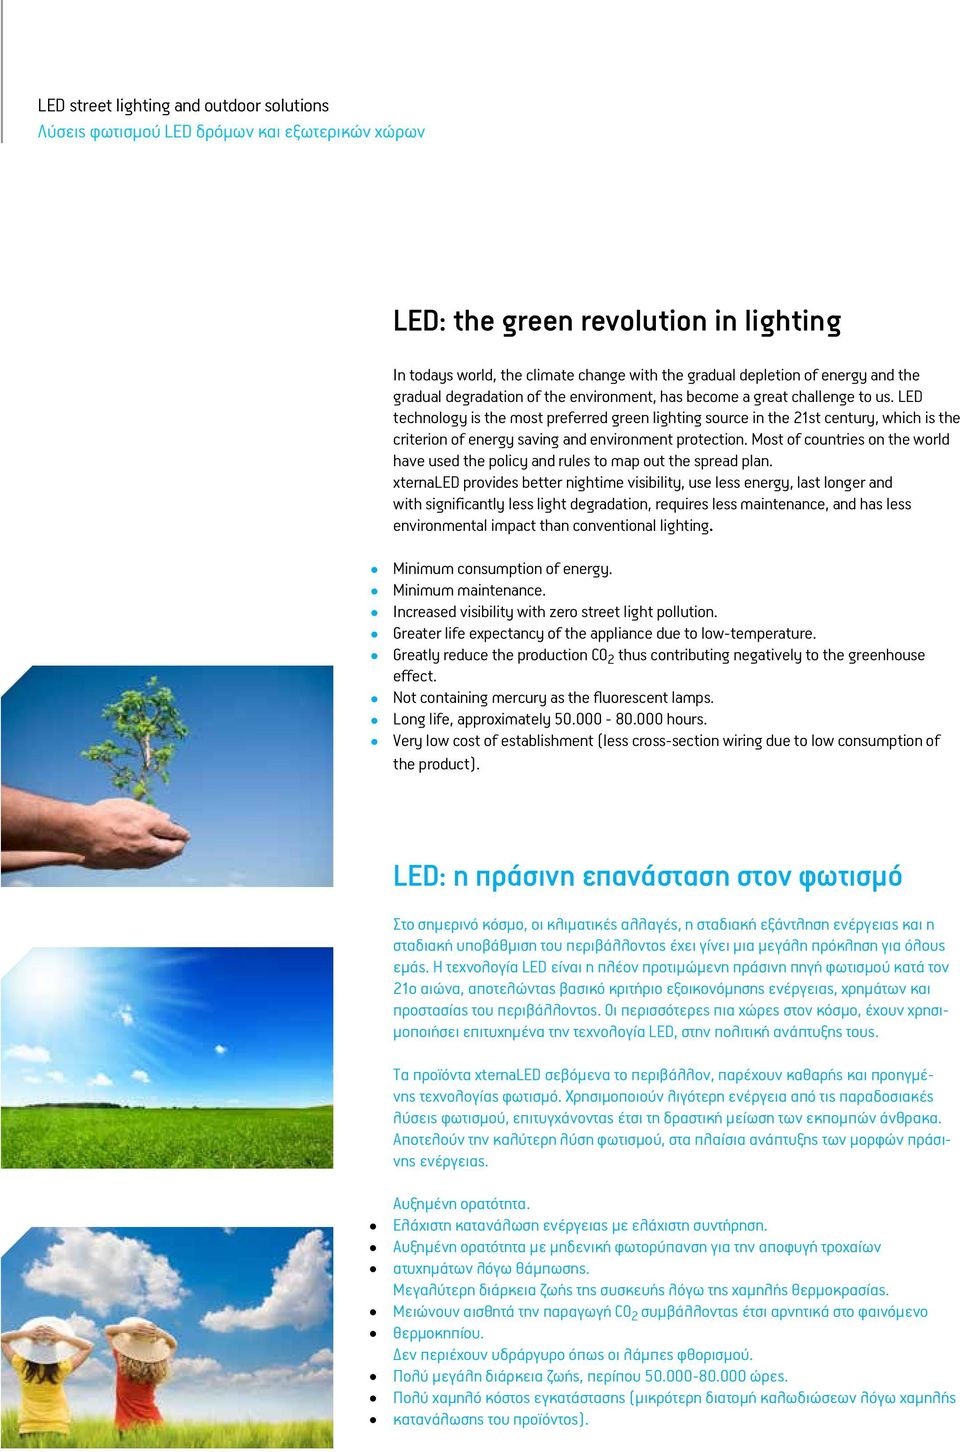 LED technology is the most preferred green lighting source in the 21st century, which is the criterion of energy saving and environment protection.